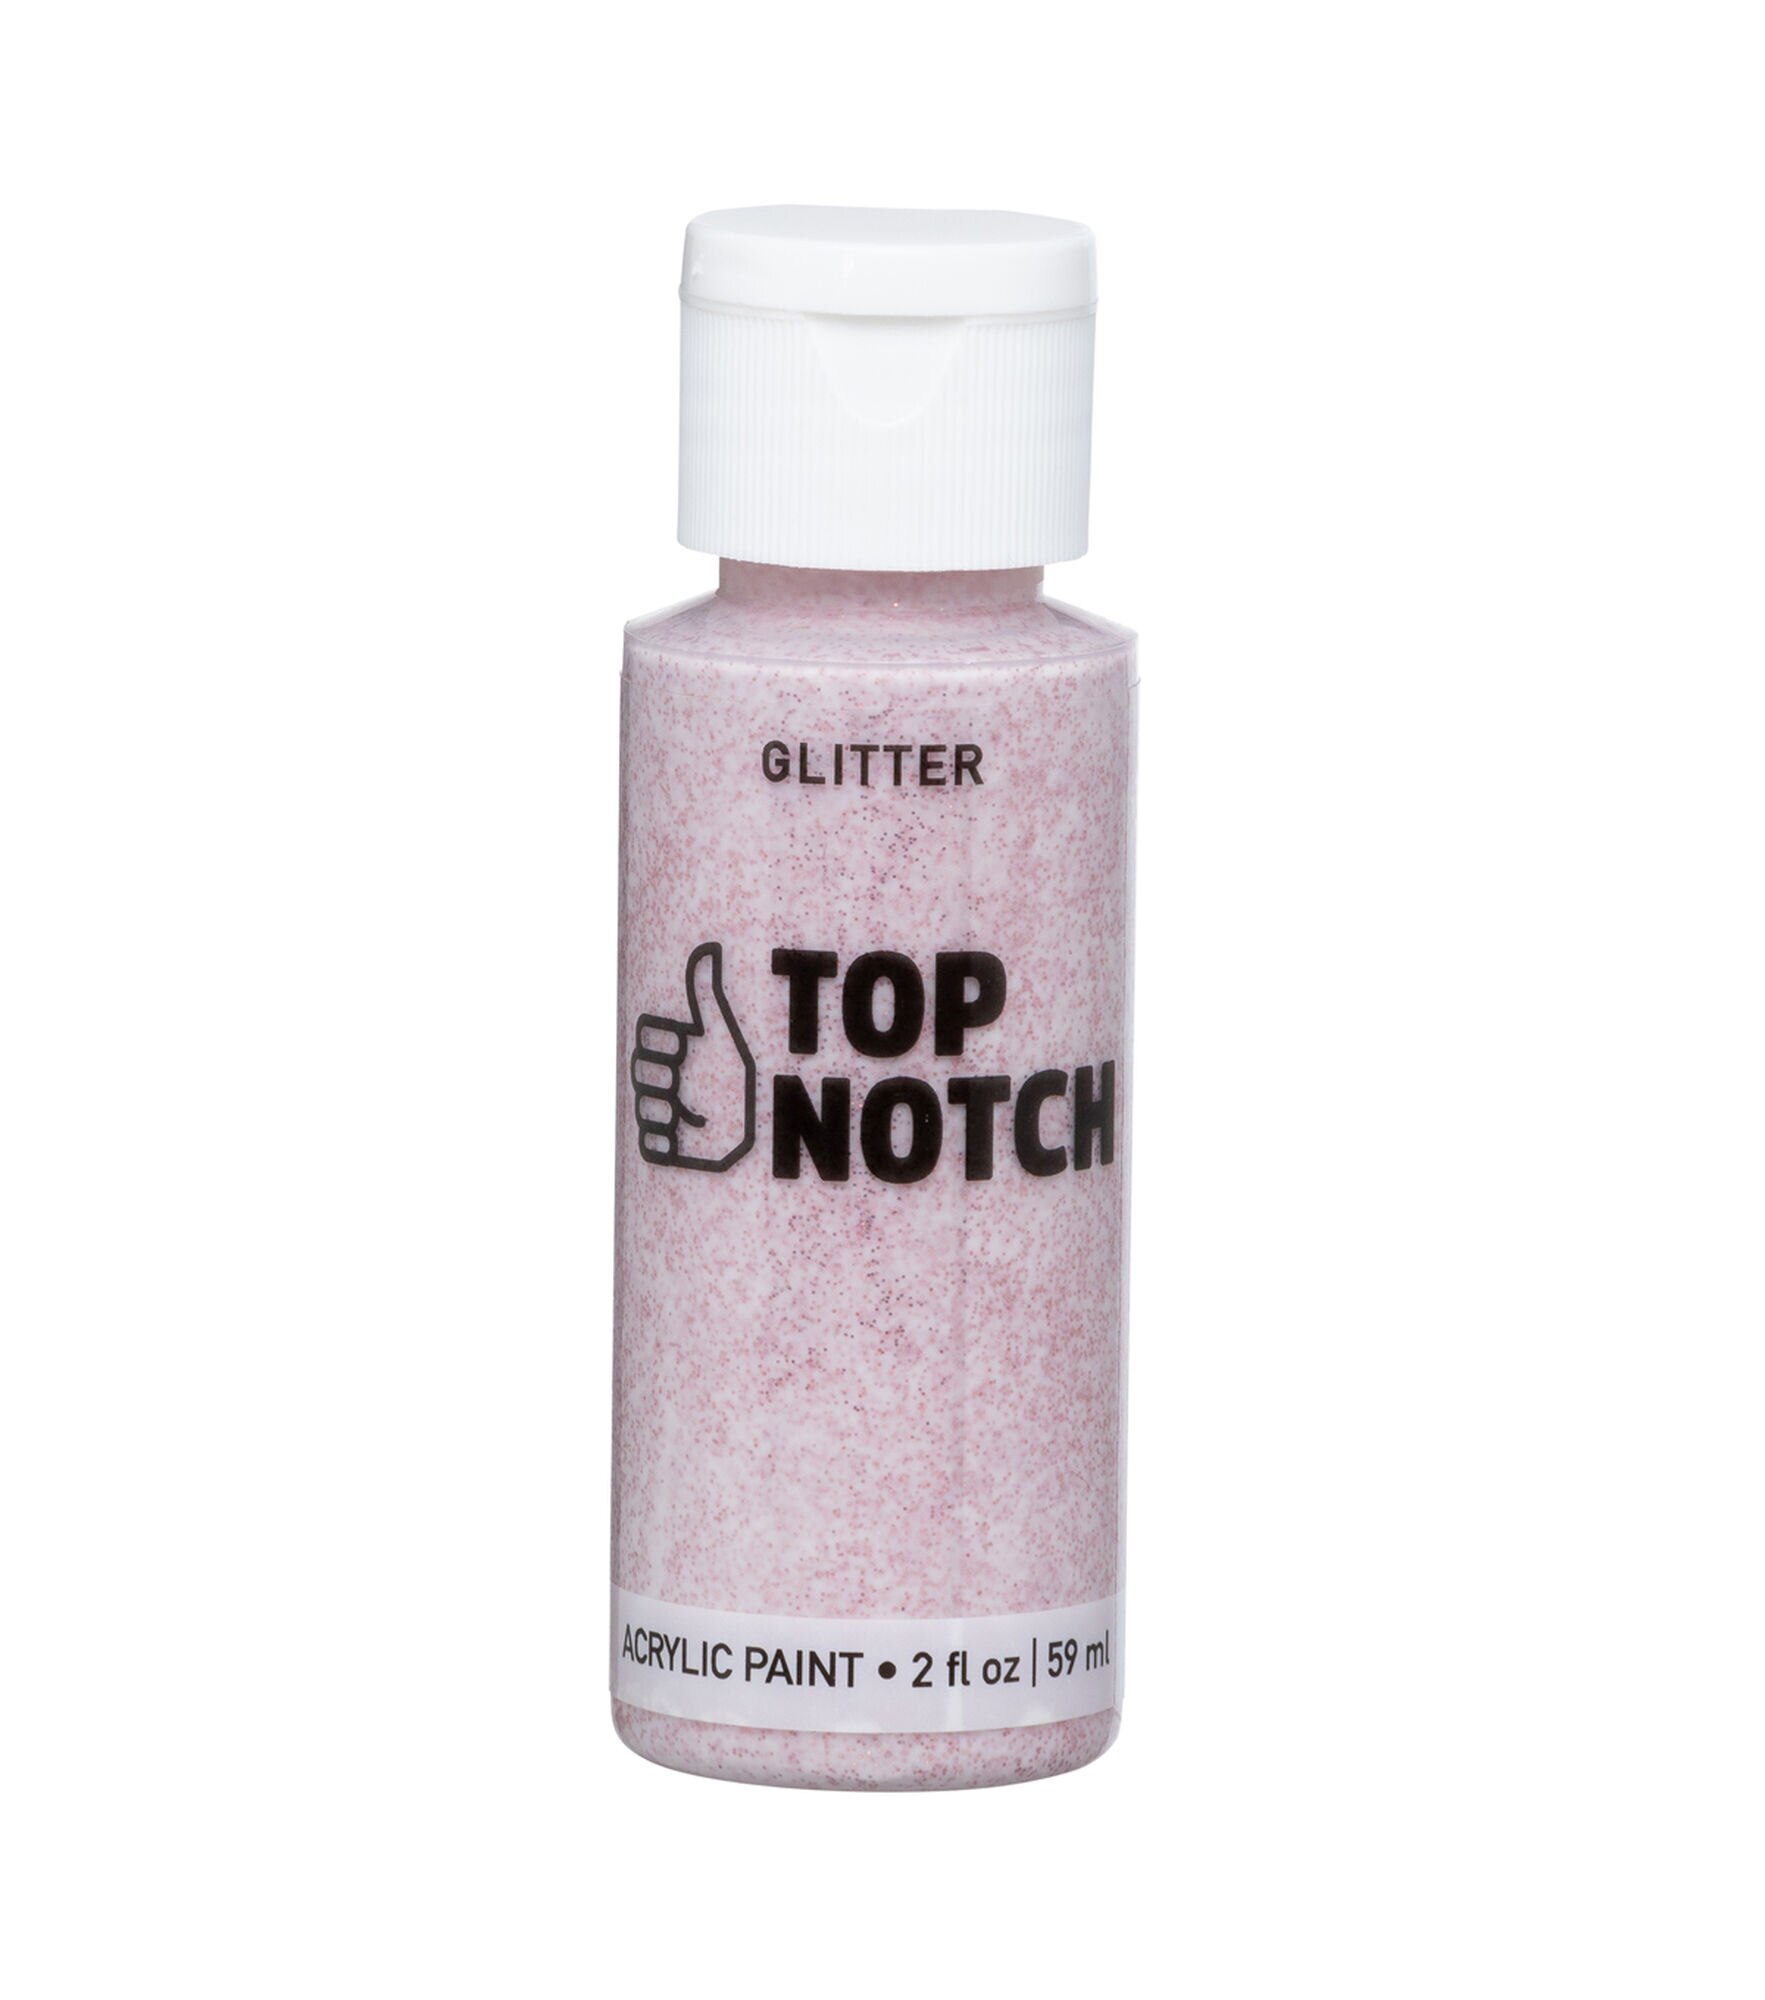 2oz White Glitter Acrylic Craft Paint by Top Notch, Rose, hi-res